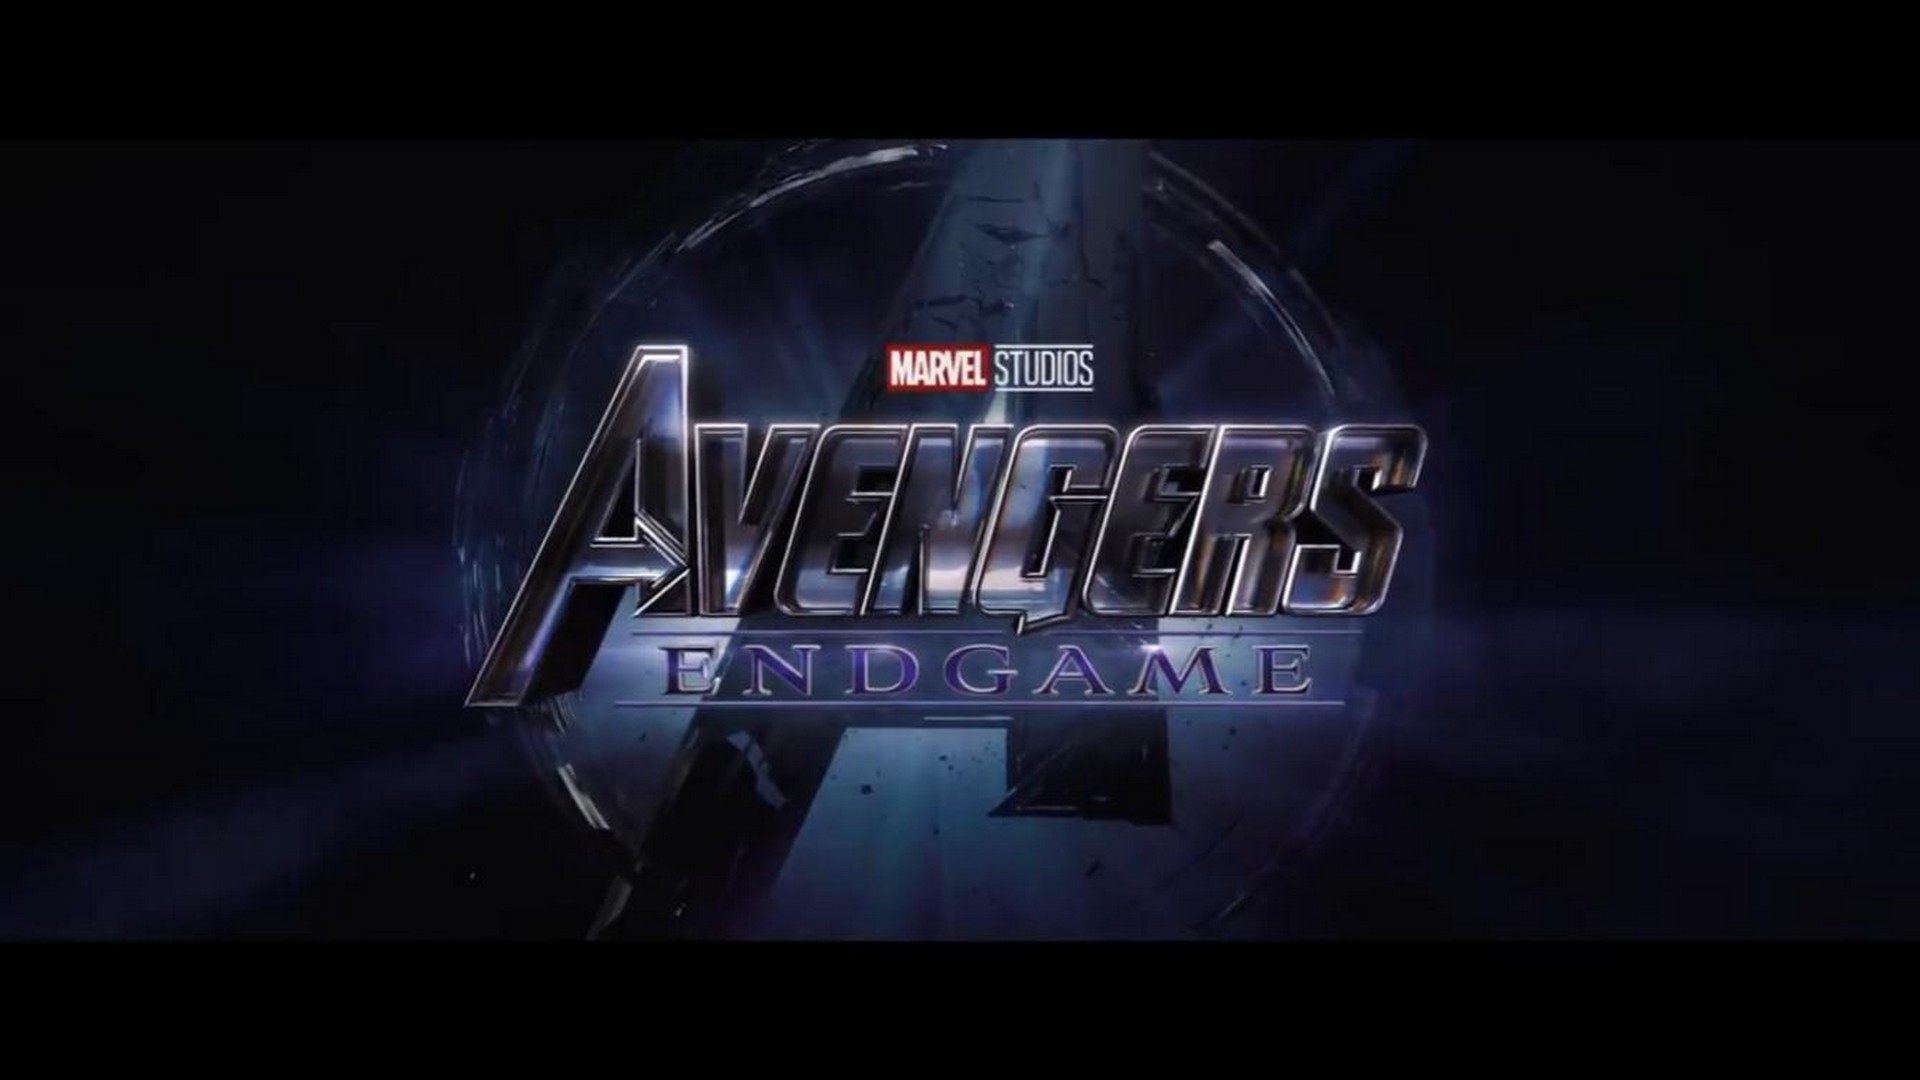 Avengers Endgame 2019 Trailer Wallpaper with high-resolution 1920x1080 pixel. You can use this poster wallpaper for your Desktop Computers, Mac Screensavers, Windows Backgrounds, iPhone Wallpapers, Tablet or Android Lock screen and another Mobile device